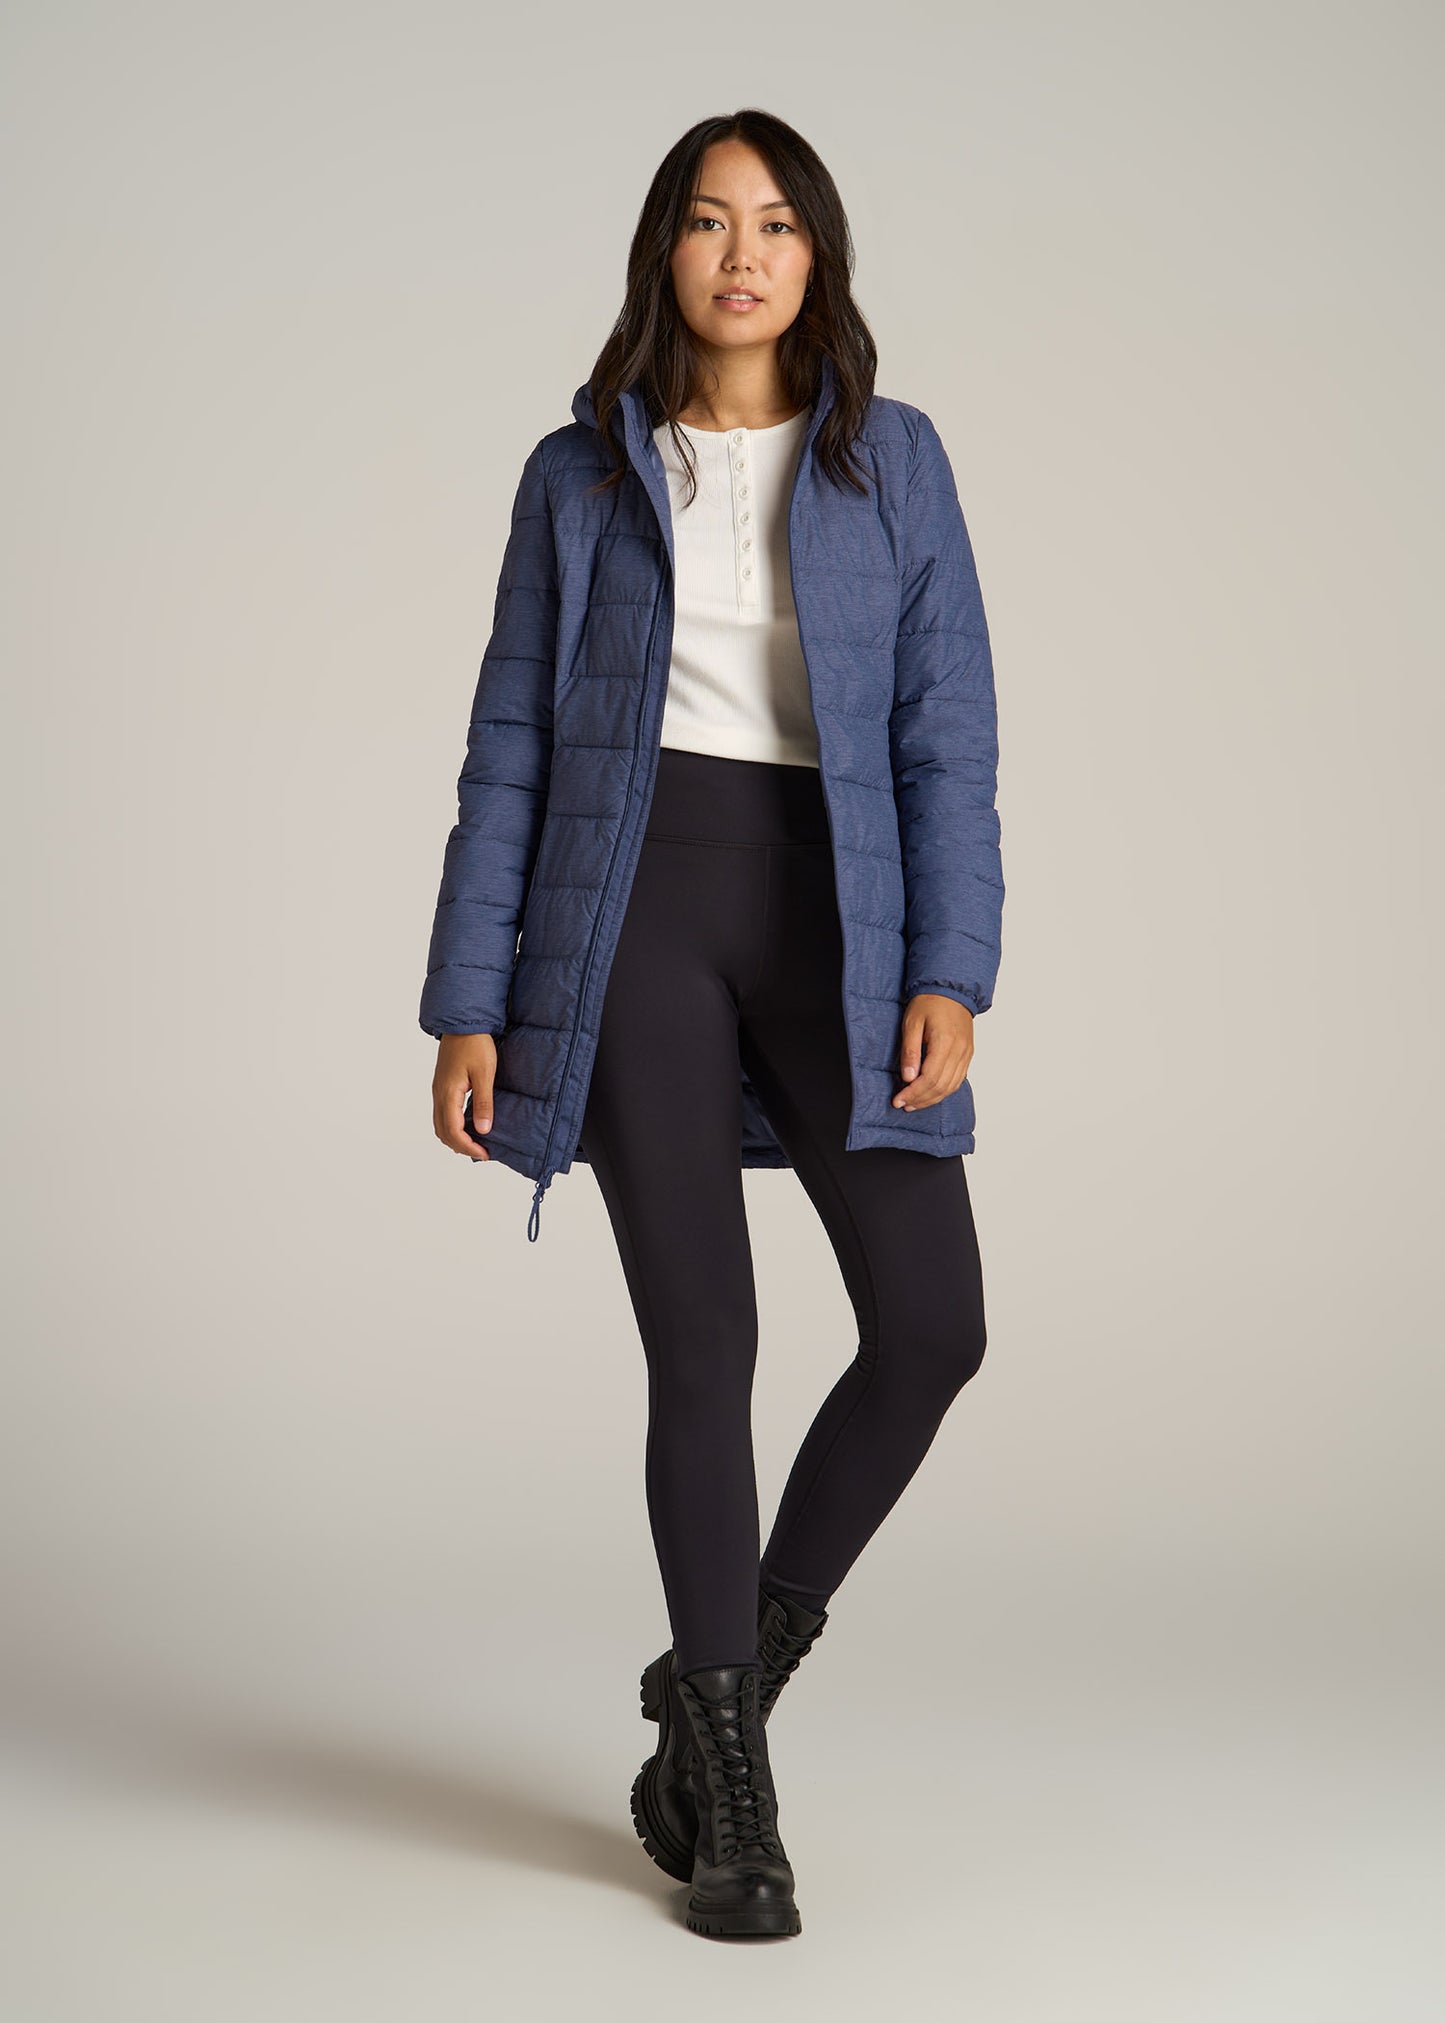 Packable Puffer Jacket for Tall Women in Blue Space Dye